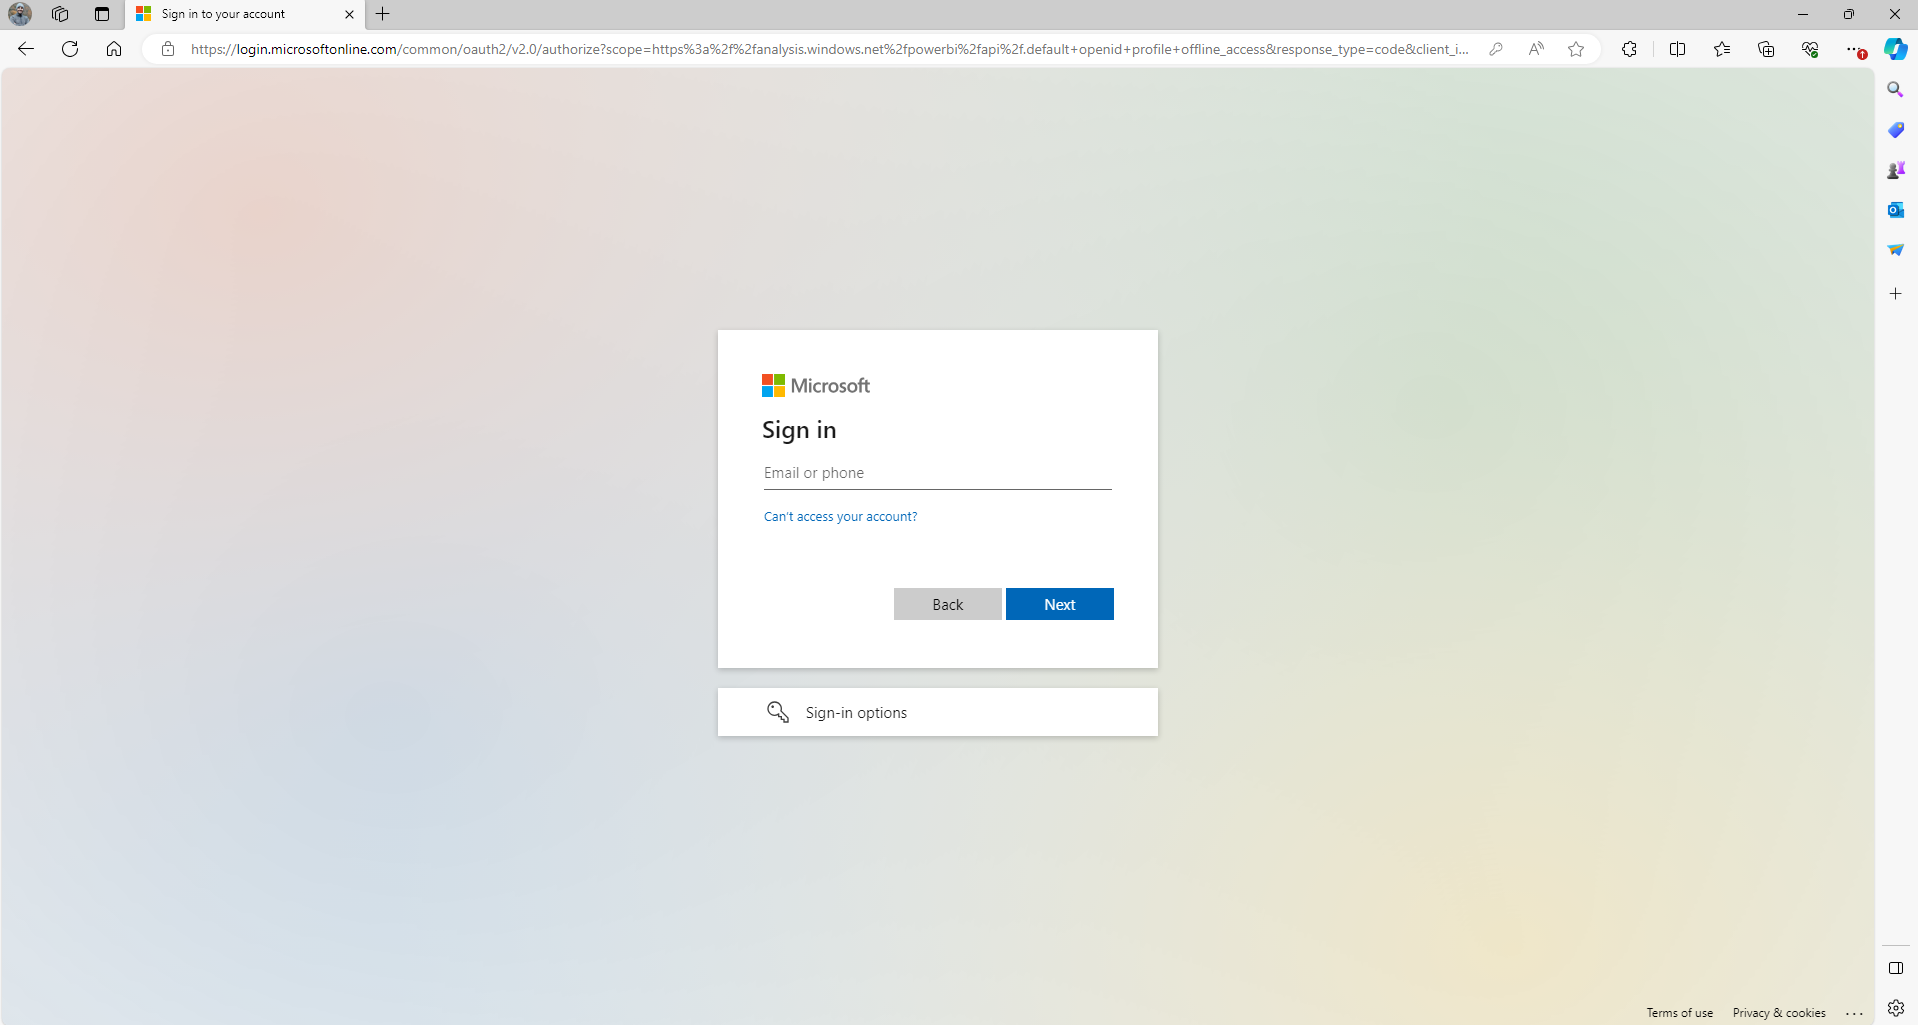 Screenshot of Microsoft sign in page.